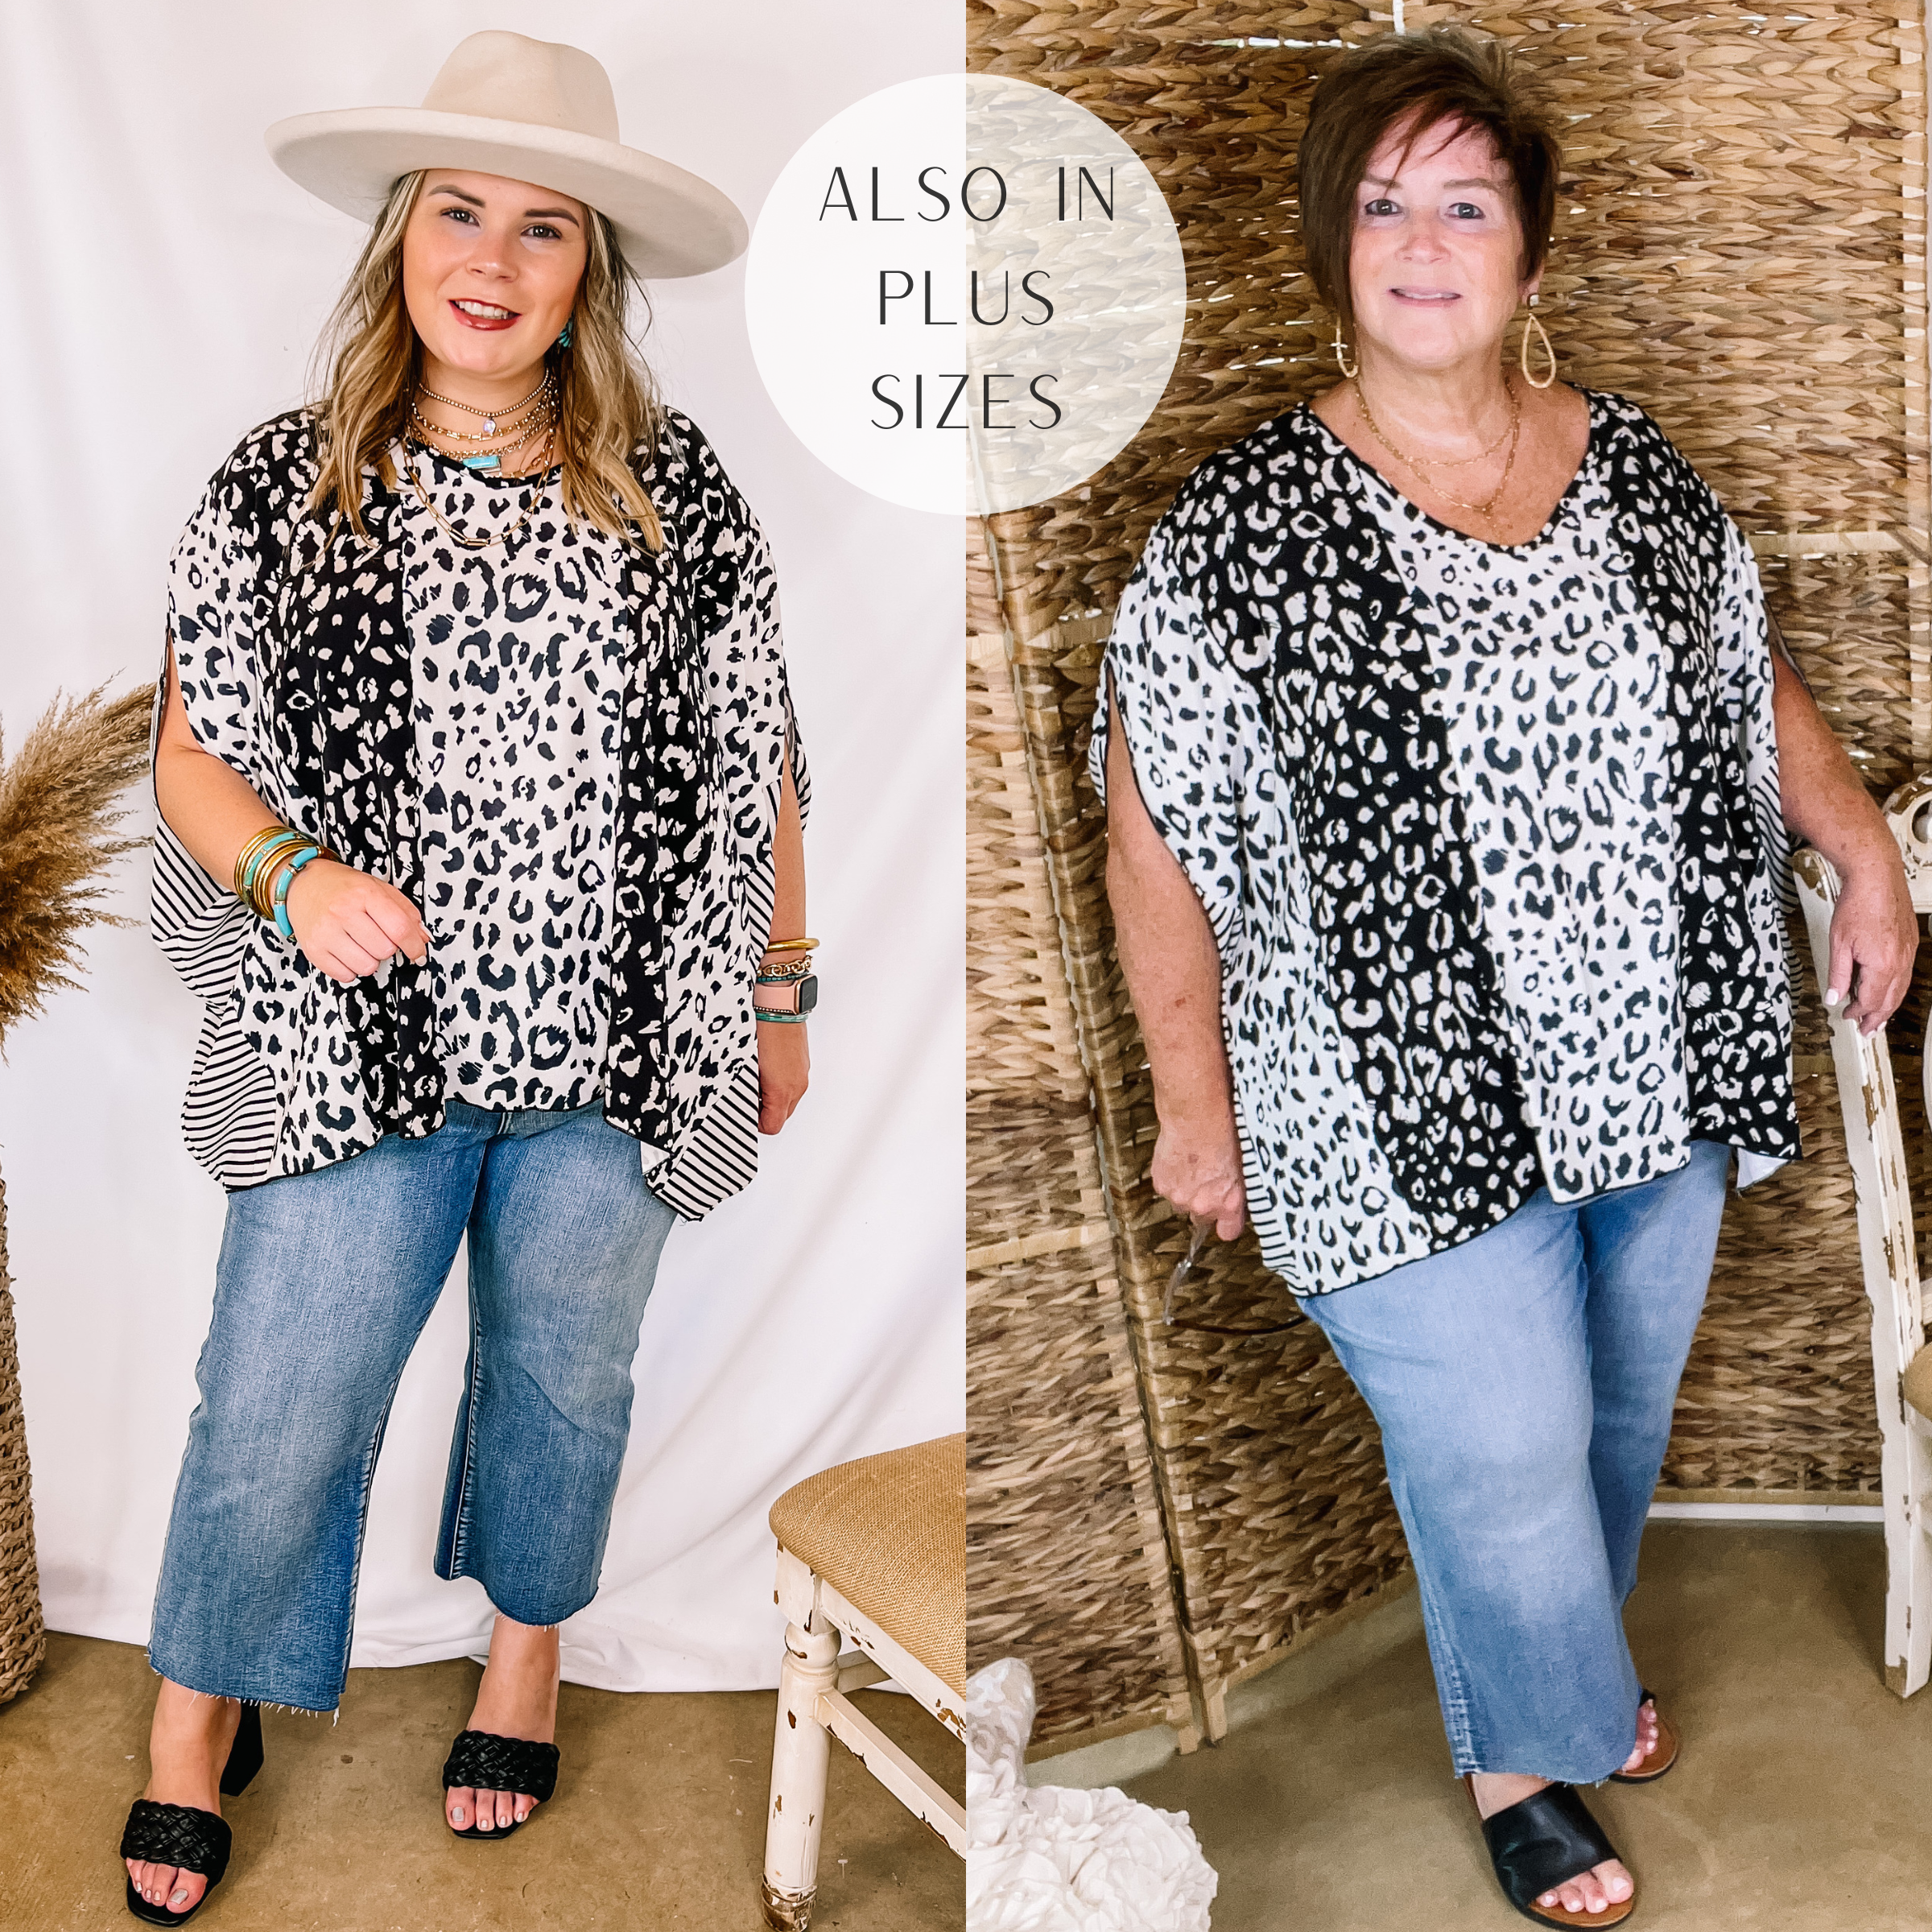 Pursue Your Passion Print Block Poncho Top in Black and White - Giddy Up Glamour Boutique